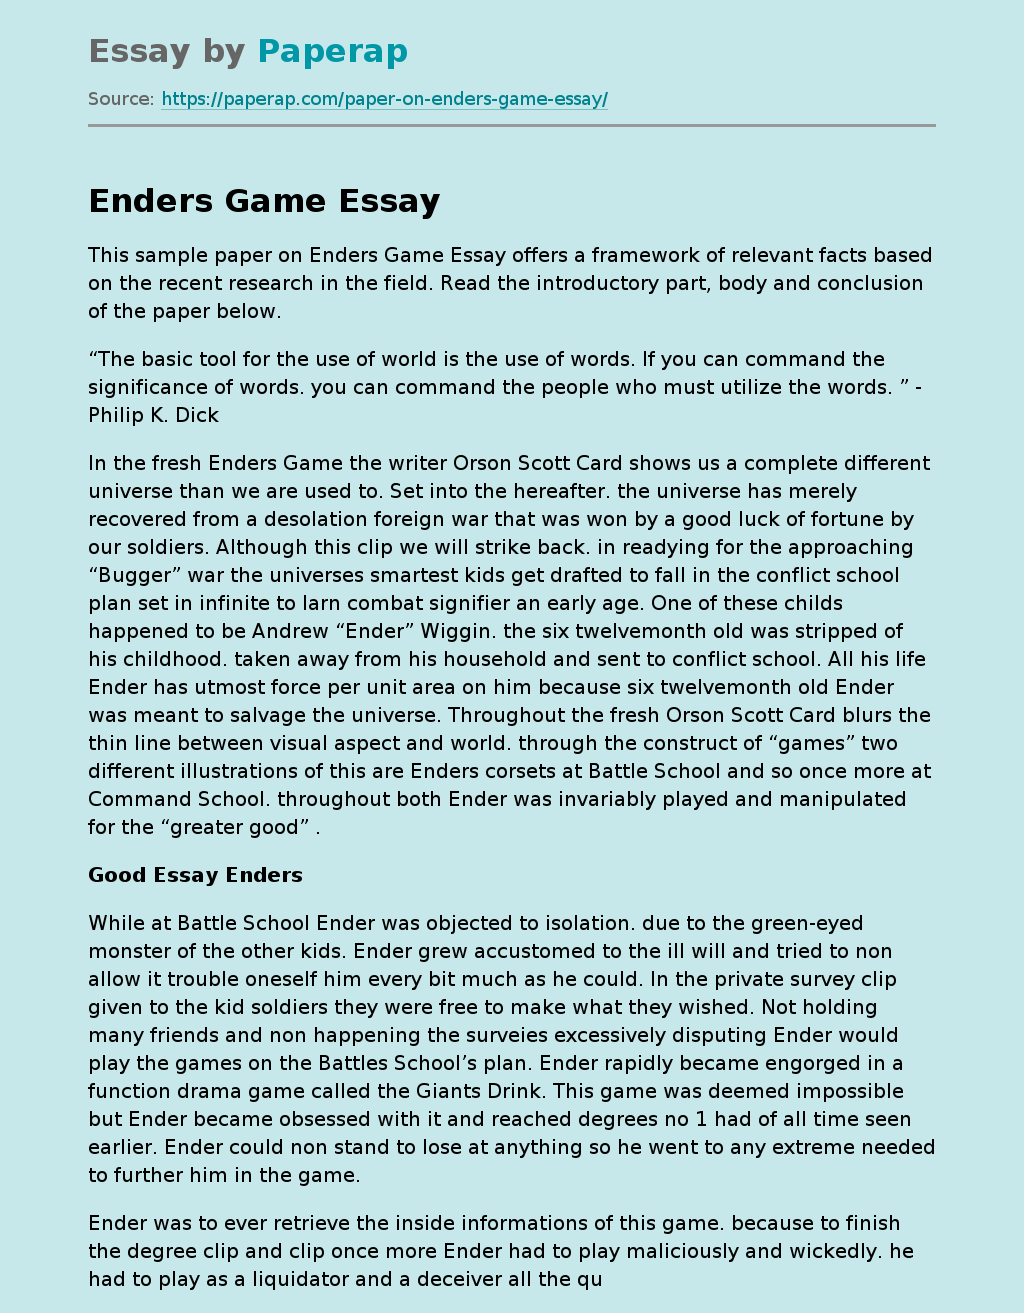 Enders Game: A Framework of Relevant Facts